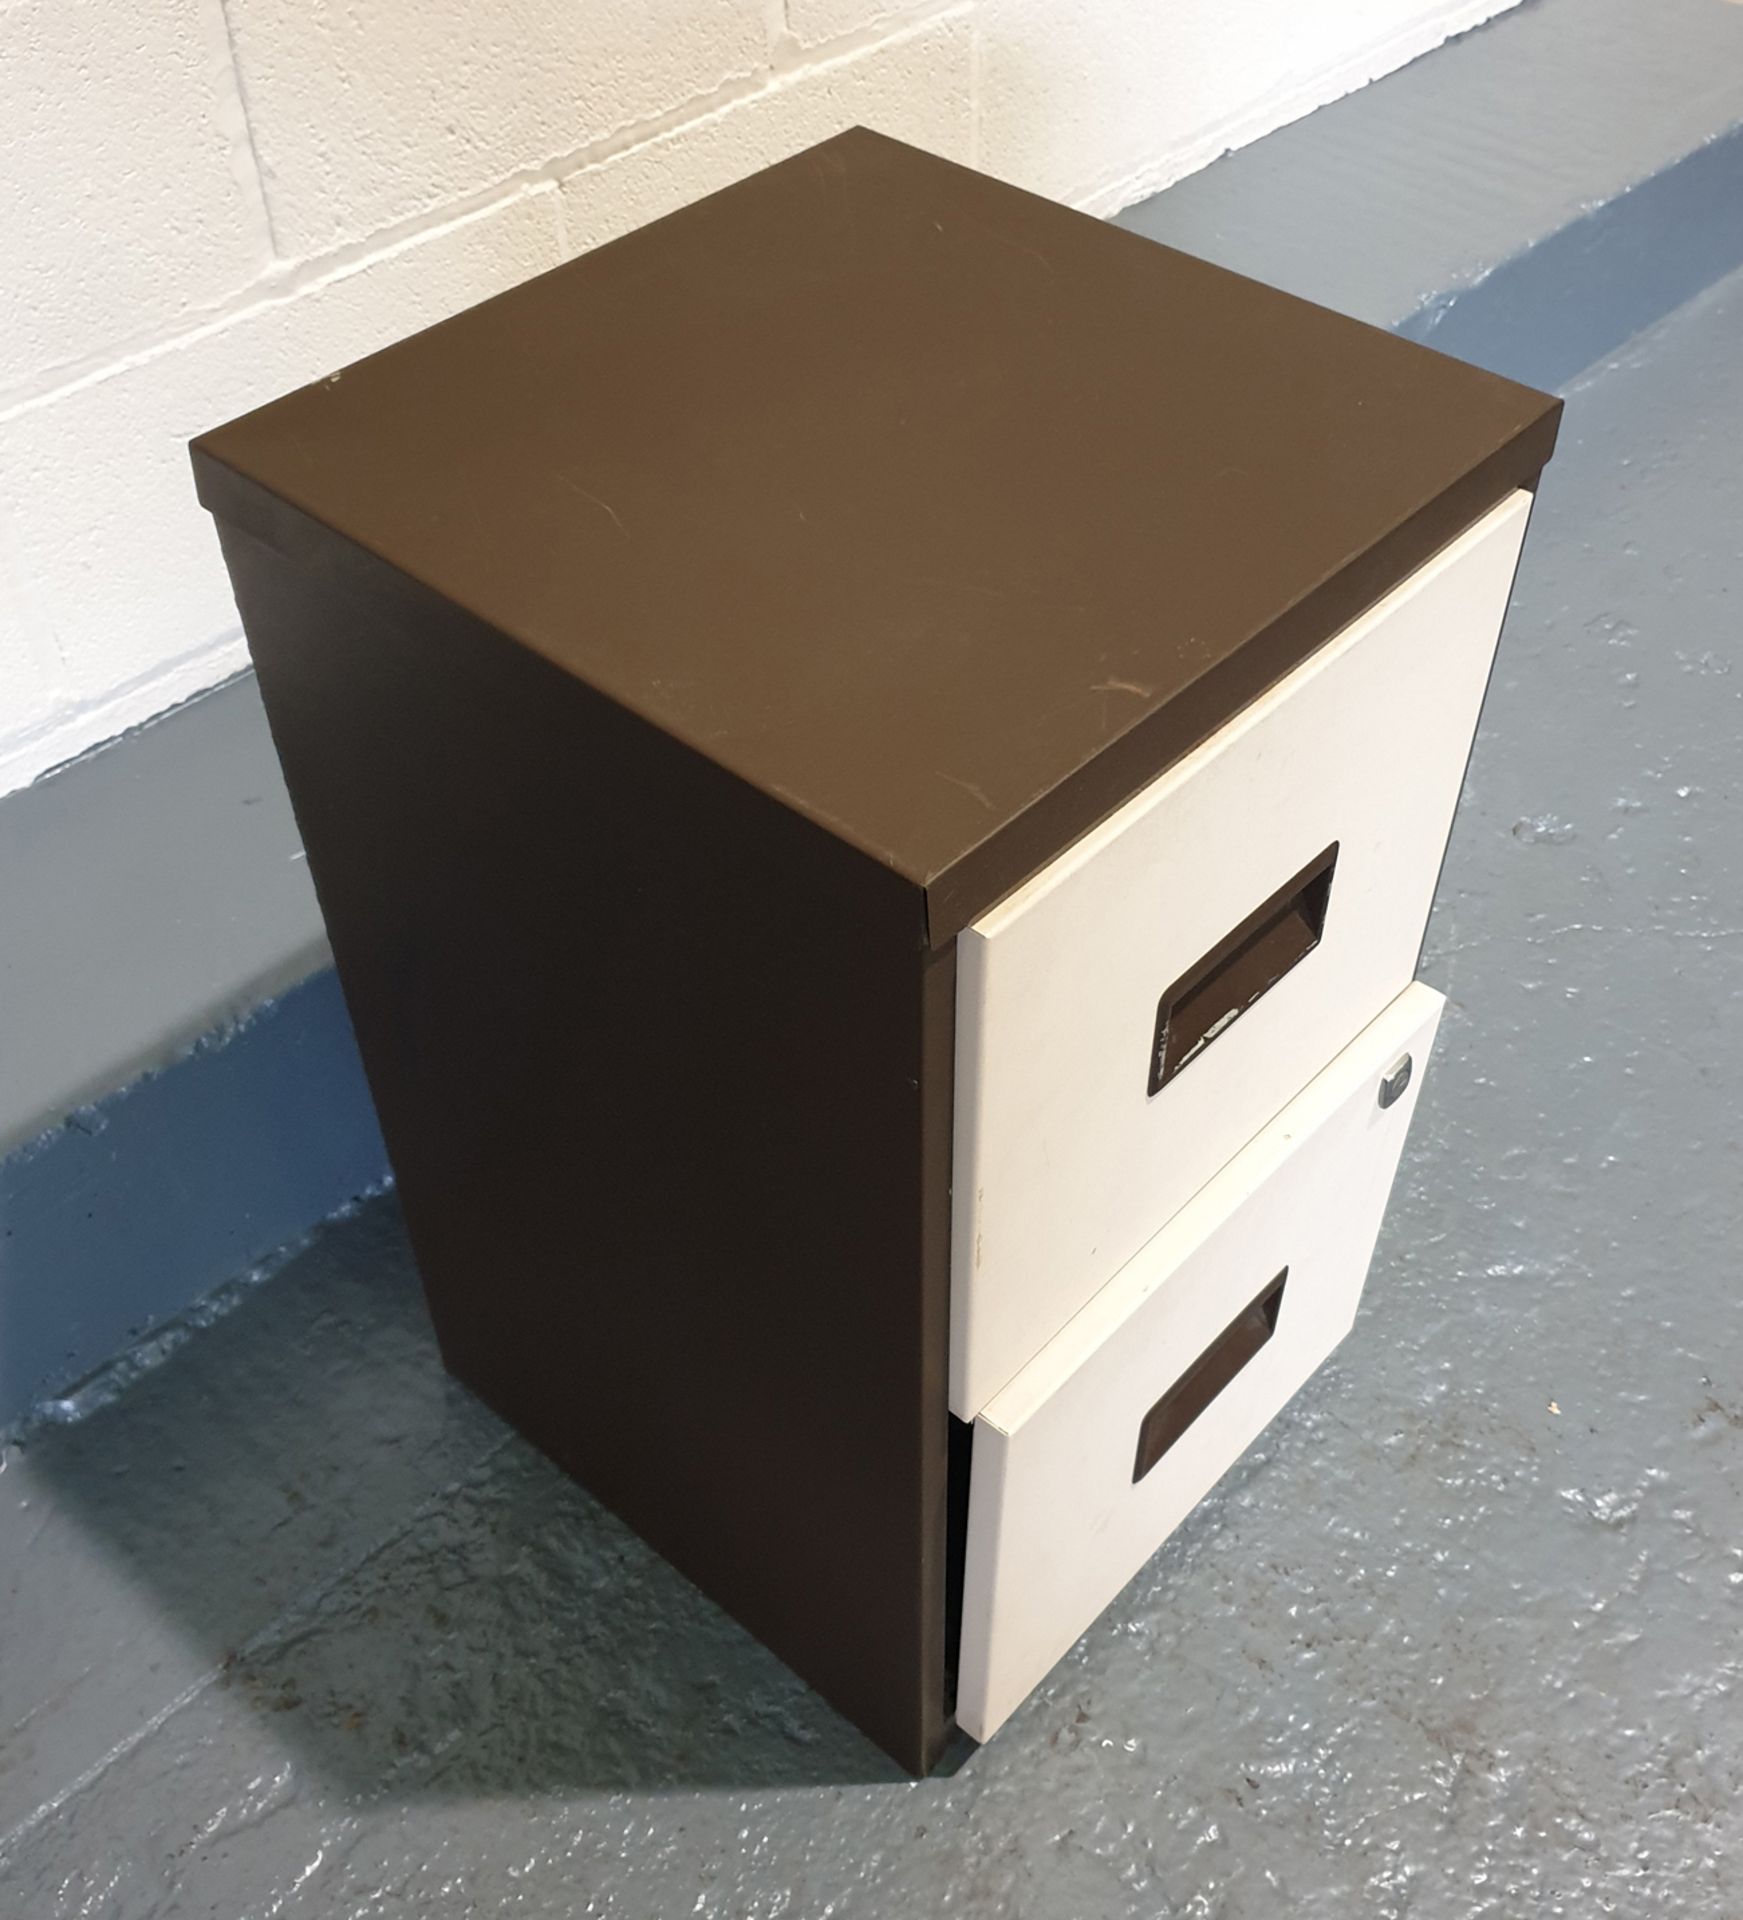 2 Drawer Filling Cabinet. No Key. Approx Dimensions 400mm x 400mm x 660mm High. - Image 3 of 5